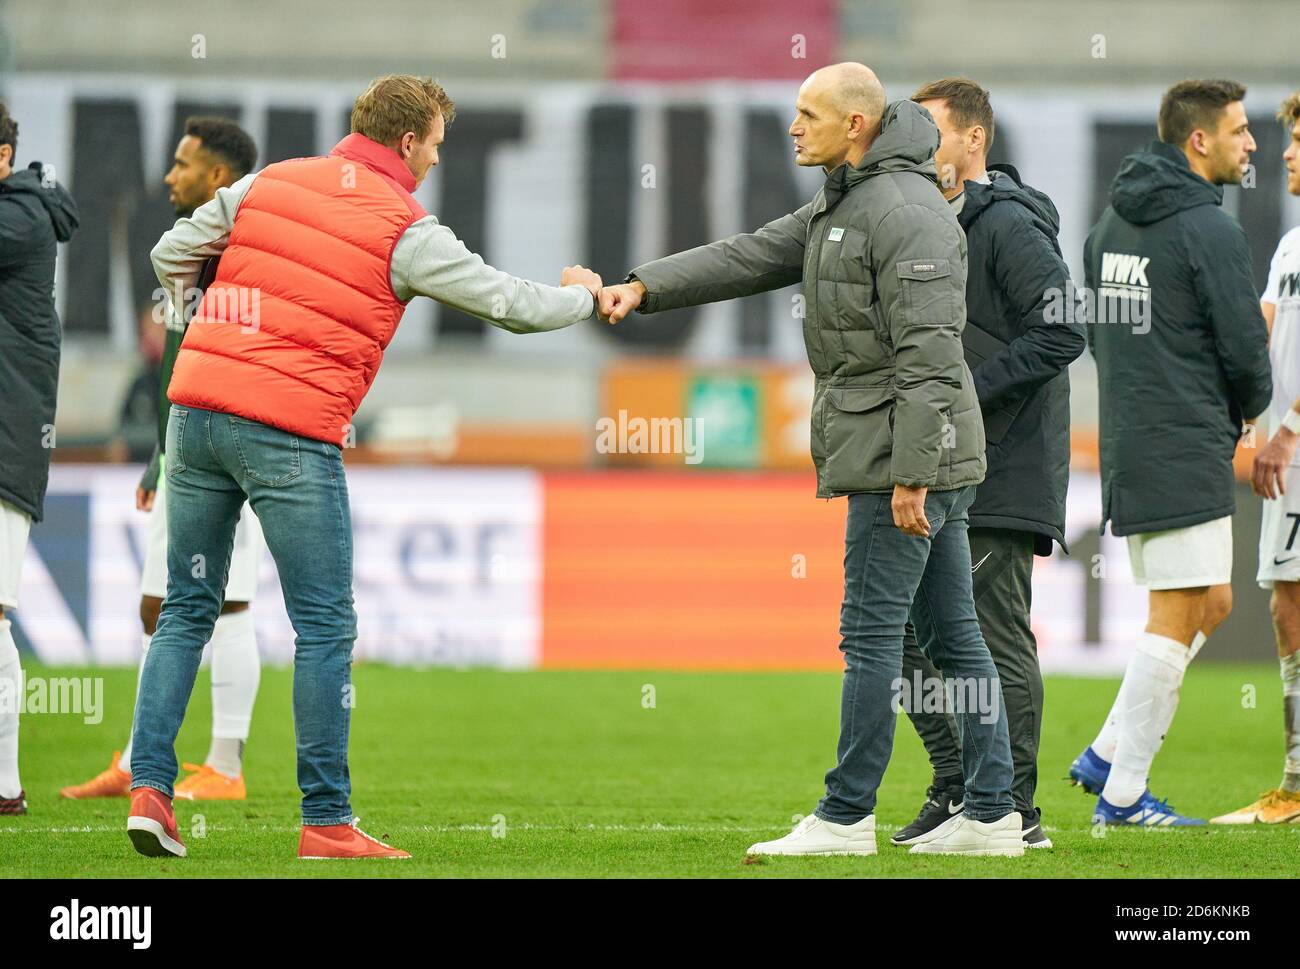 Julian NAGELSMANN, RB Leipzig team manager, coach,  Heiko HERRLICH, FCA coach,   FC AUGSBURG - RB LEIPZIG 0-2 1.German Football League , Augsburg, October 17, 2020.  Season 2020/2021, match day 04,  © Peter Schatz / Alamy Live News    - DFL REGULATIONS PROHIBIT ANY USE OF PHOTOGRAPHS as IMAGE SEQUENCES and/or QUASI-VIDEO - Stock Photo